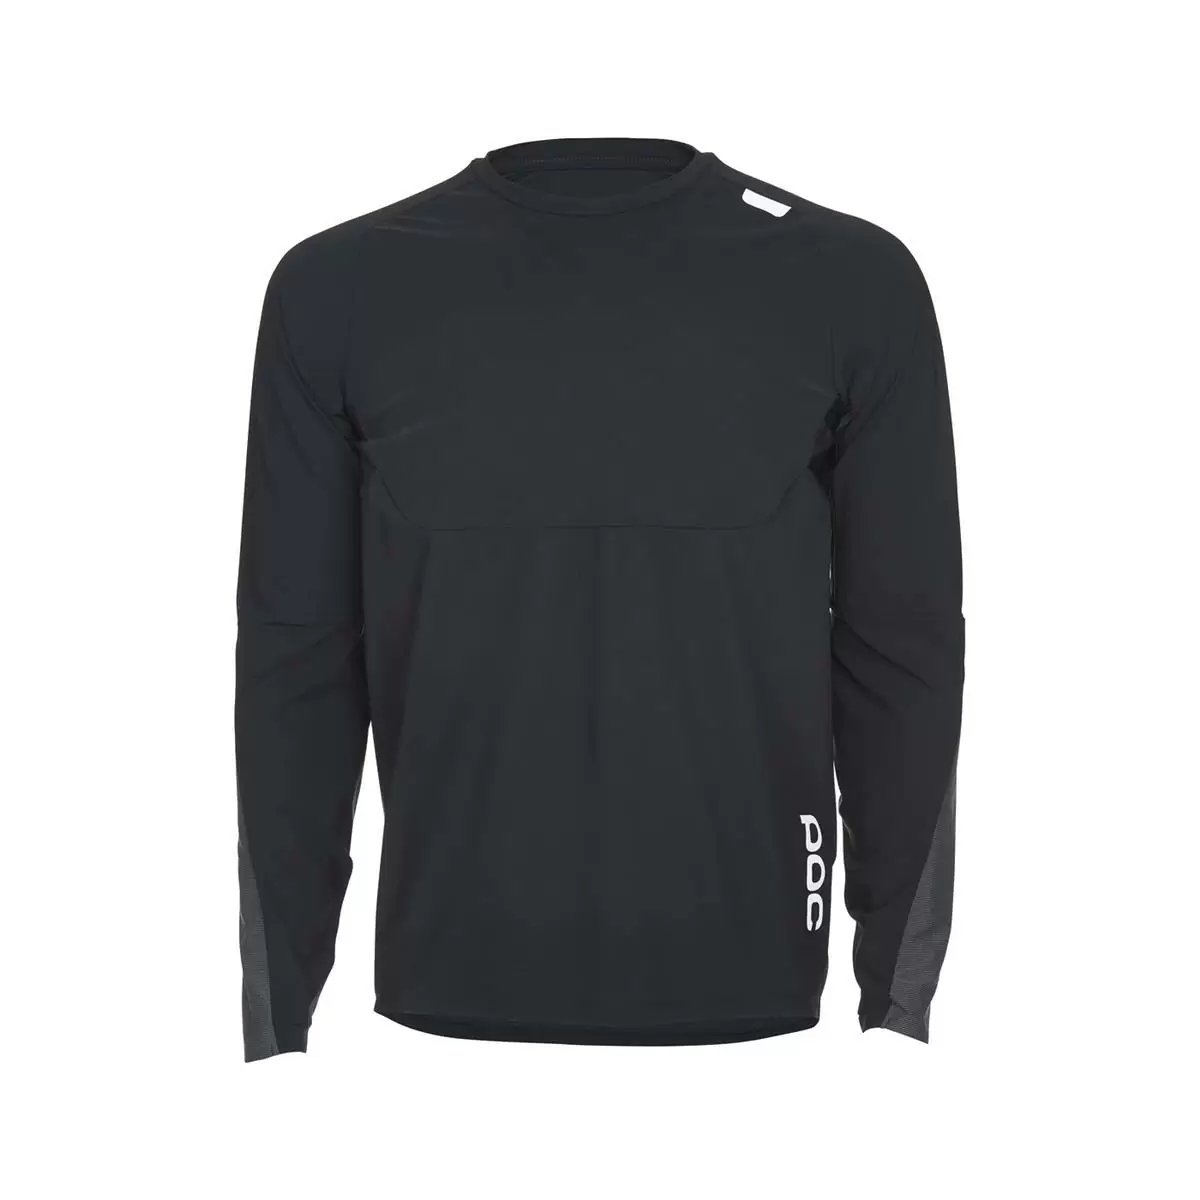 Resistance DH Long-Sleeve Jersey Black Size S - image